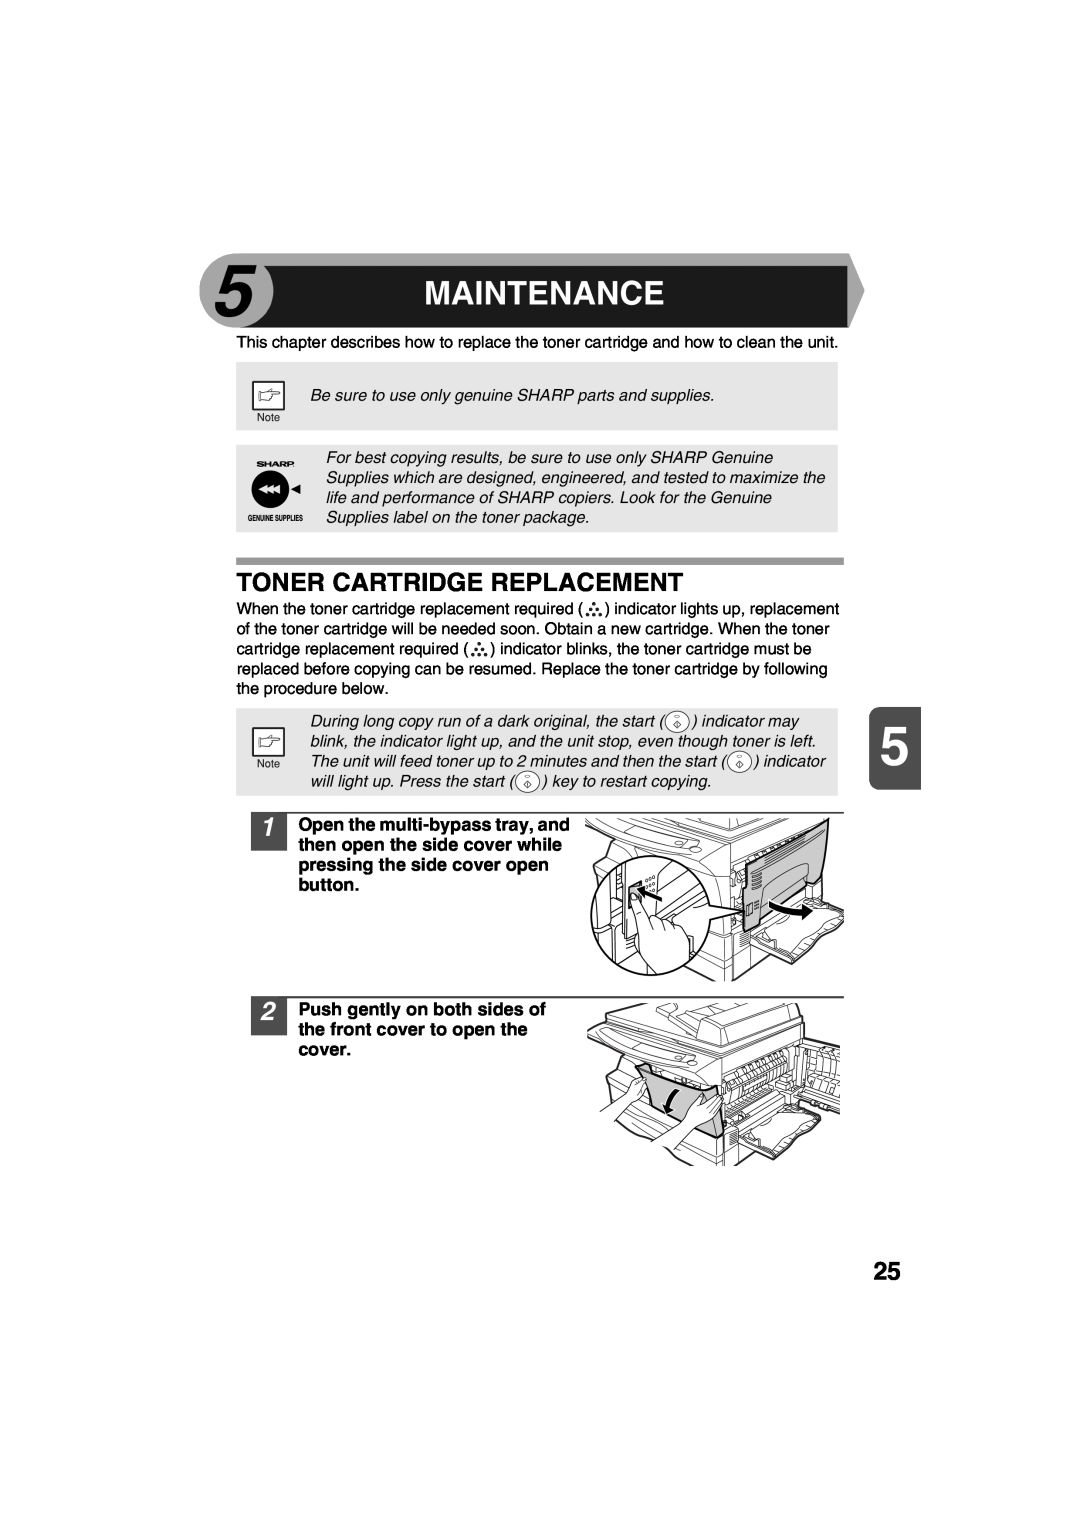 Sharp AR-157E Maintenance, Toner Cartridge Replacement, Push gently on both sides of the front cover to open the cover 